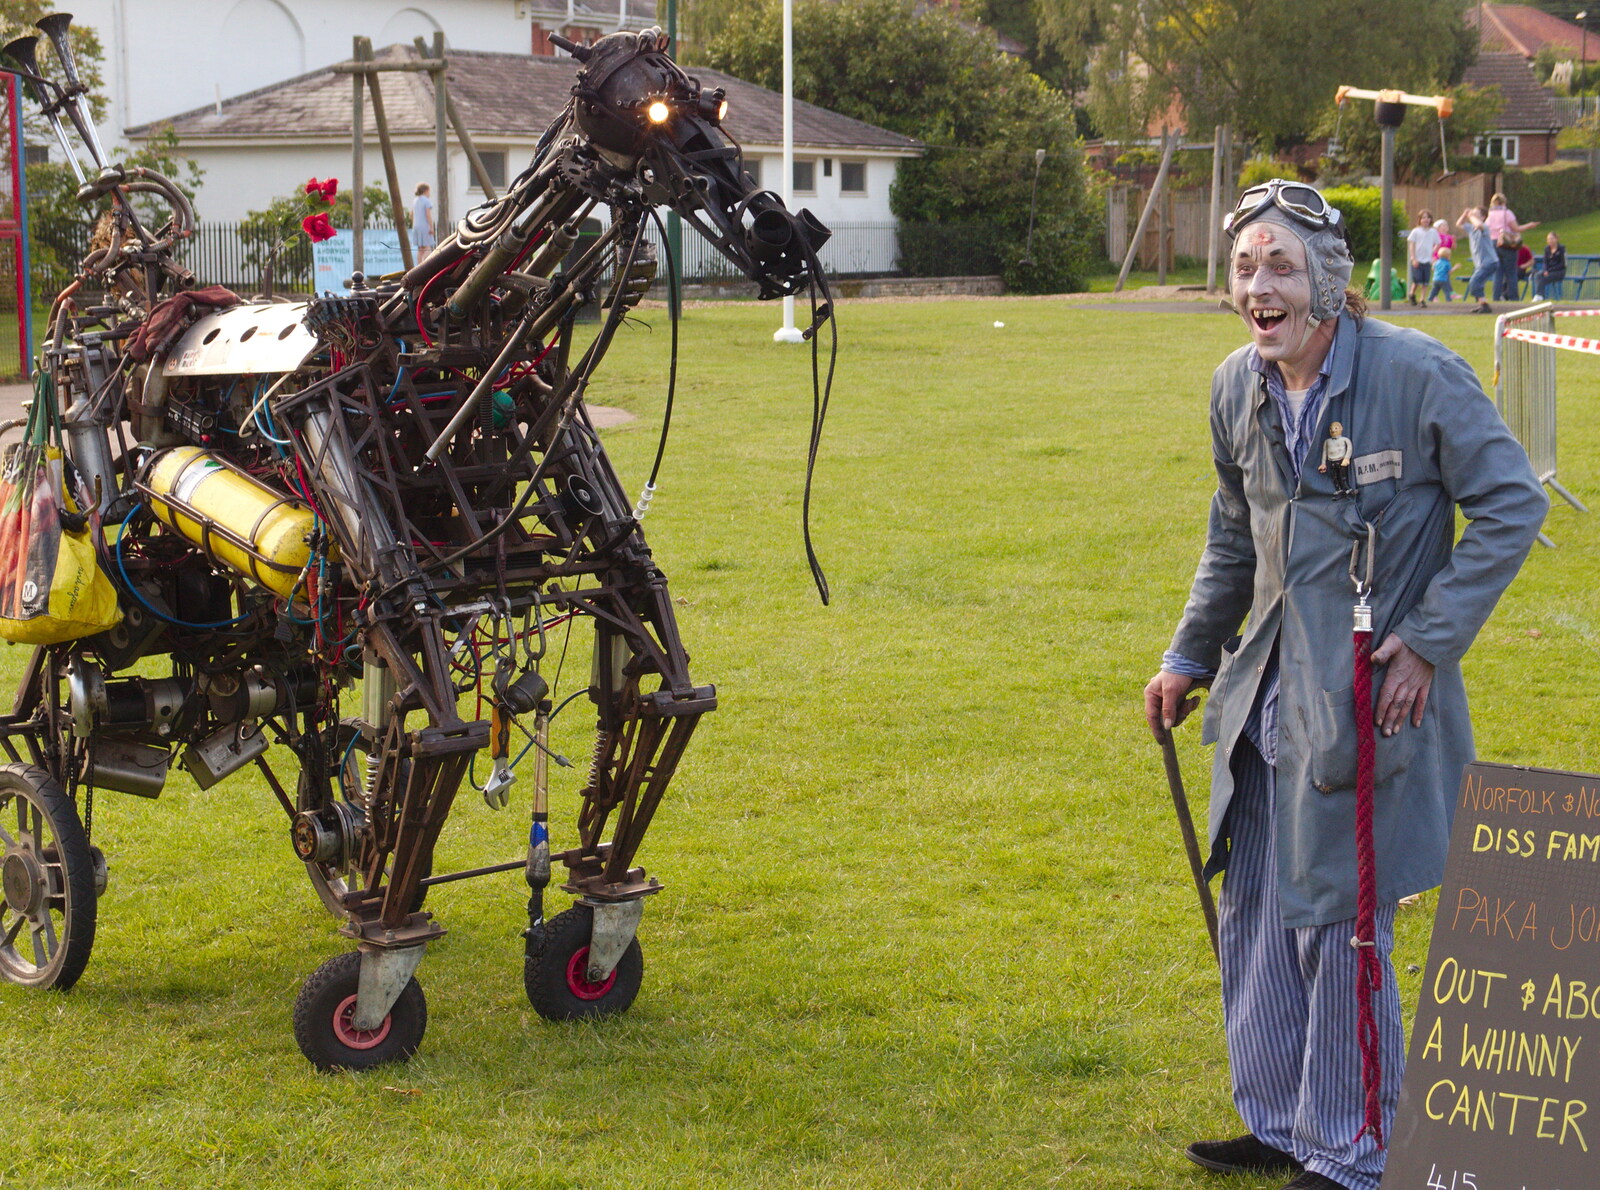 A dude with a robot horse from A Family Fun Day on the Park, Diss, Norfolk - 16th May 2014